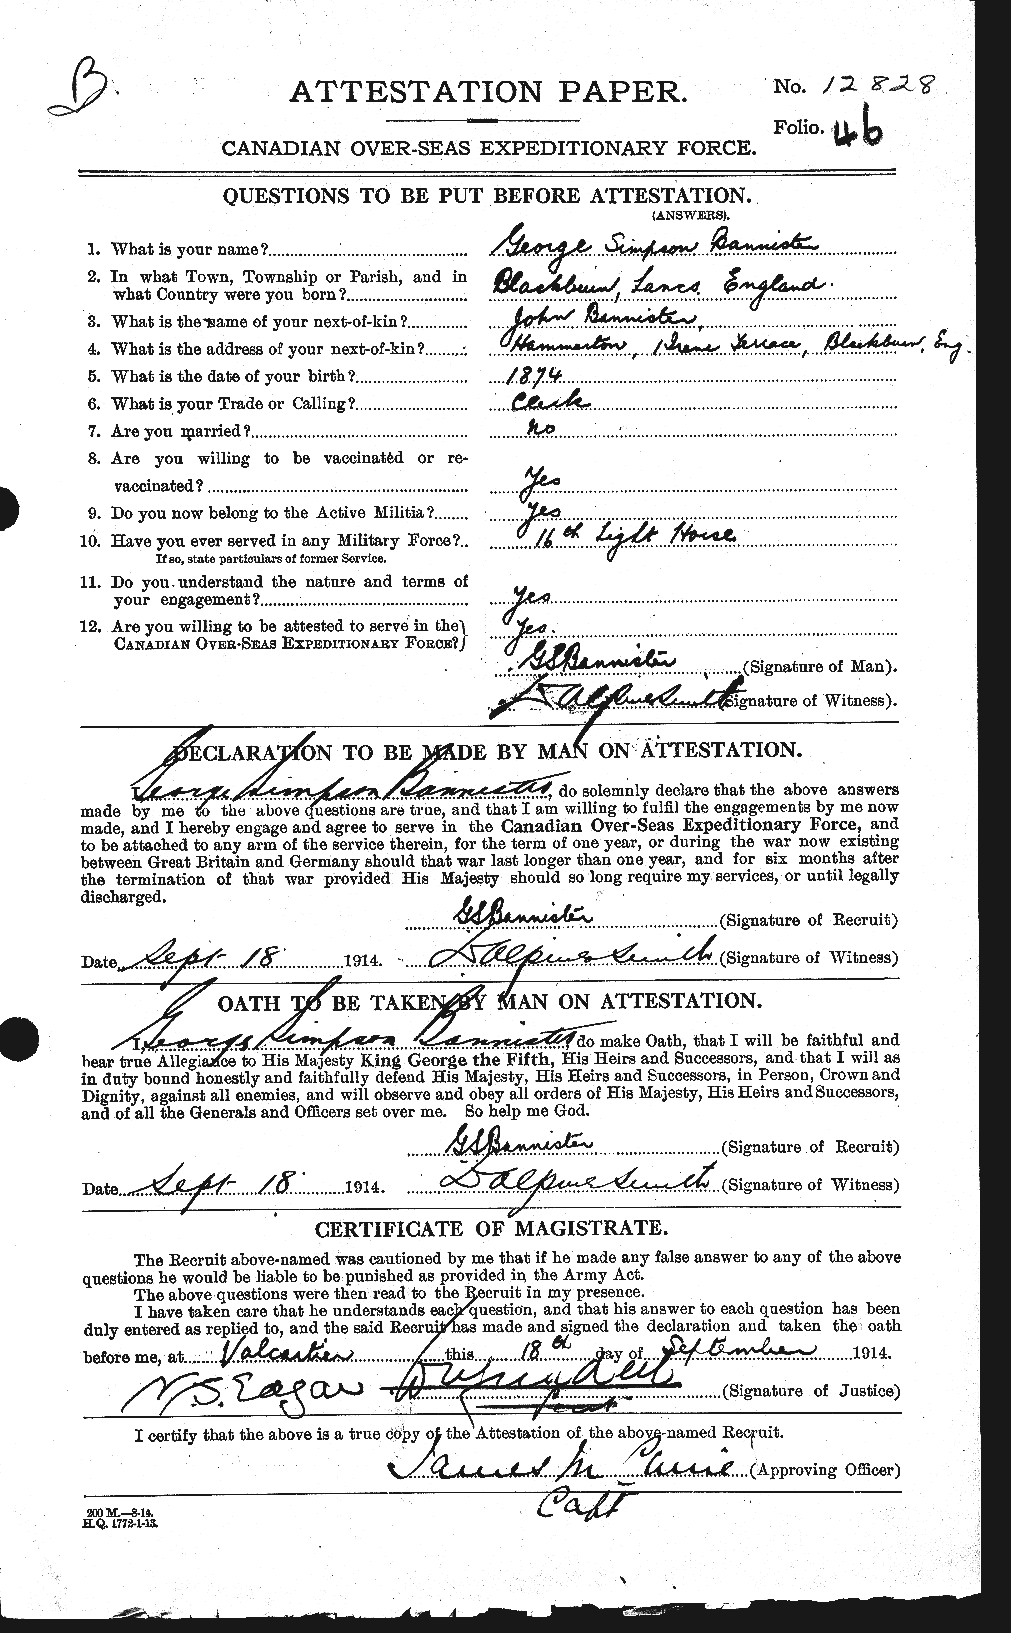 Personnel Records of the First World War - CEF 224799a